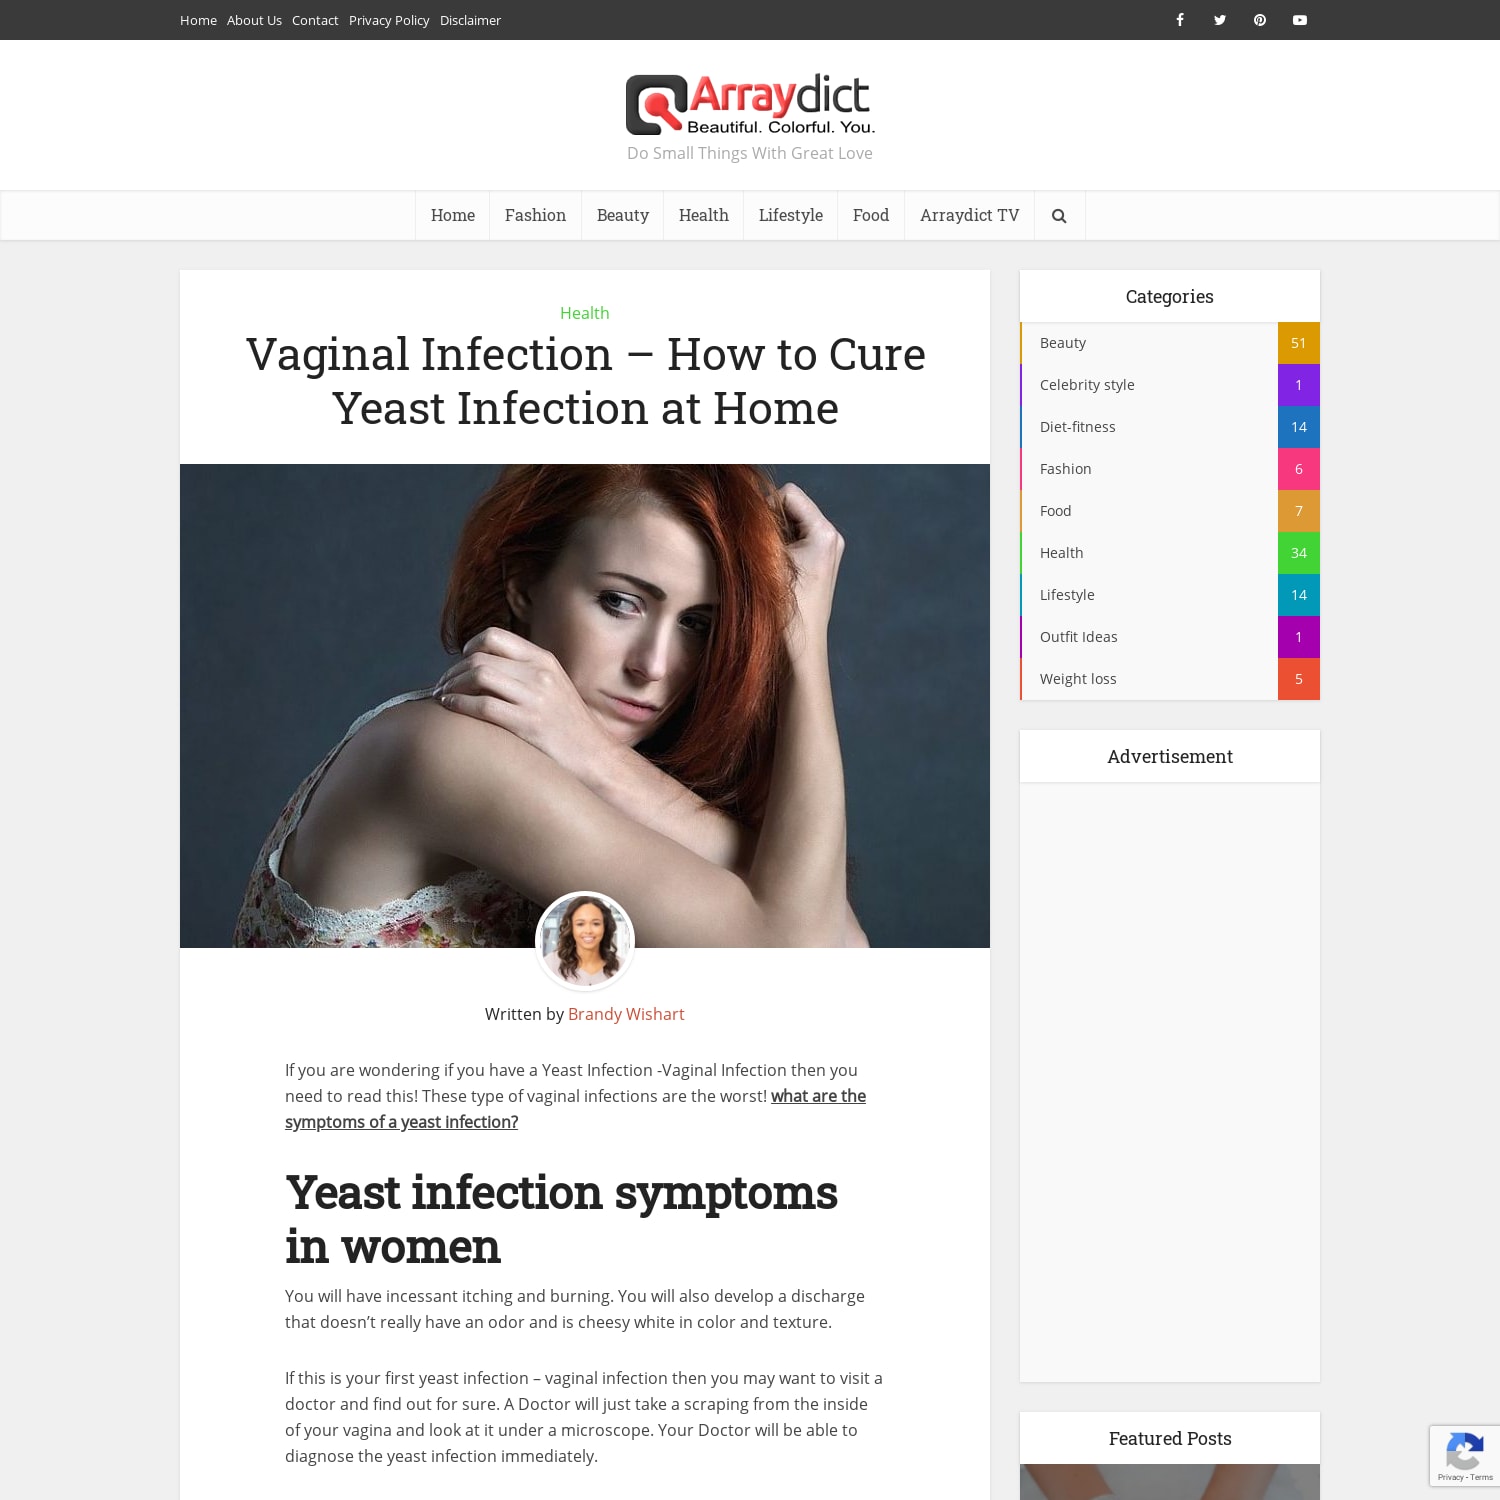 Vaginal Infection - How to Cure Yeast Infection at Home